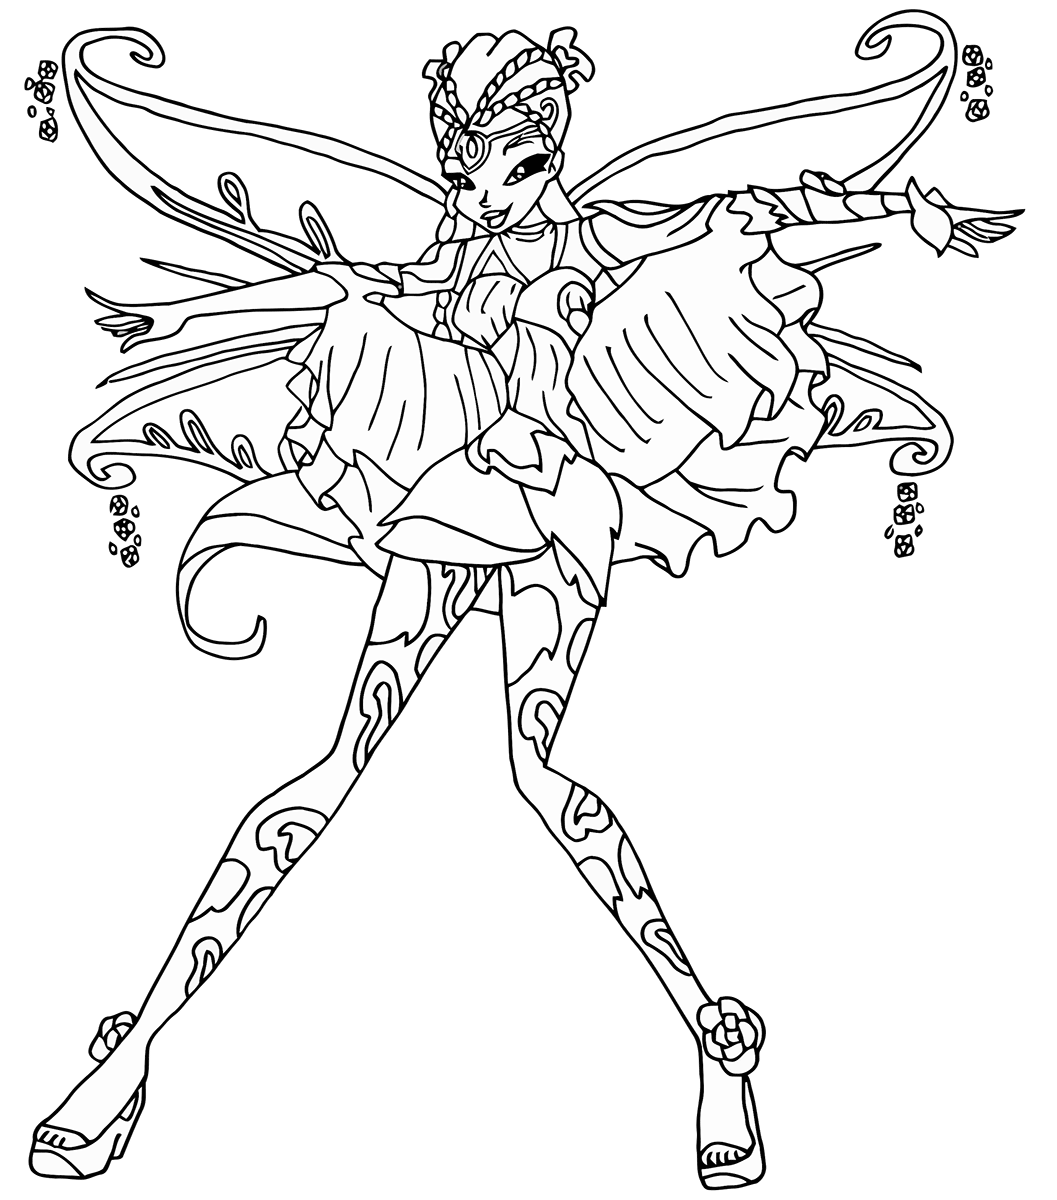 Winx Club Bloomix coloring pages to download and print for